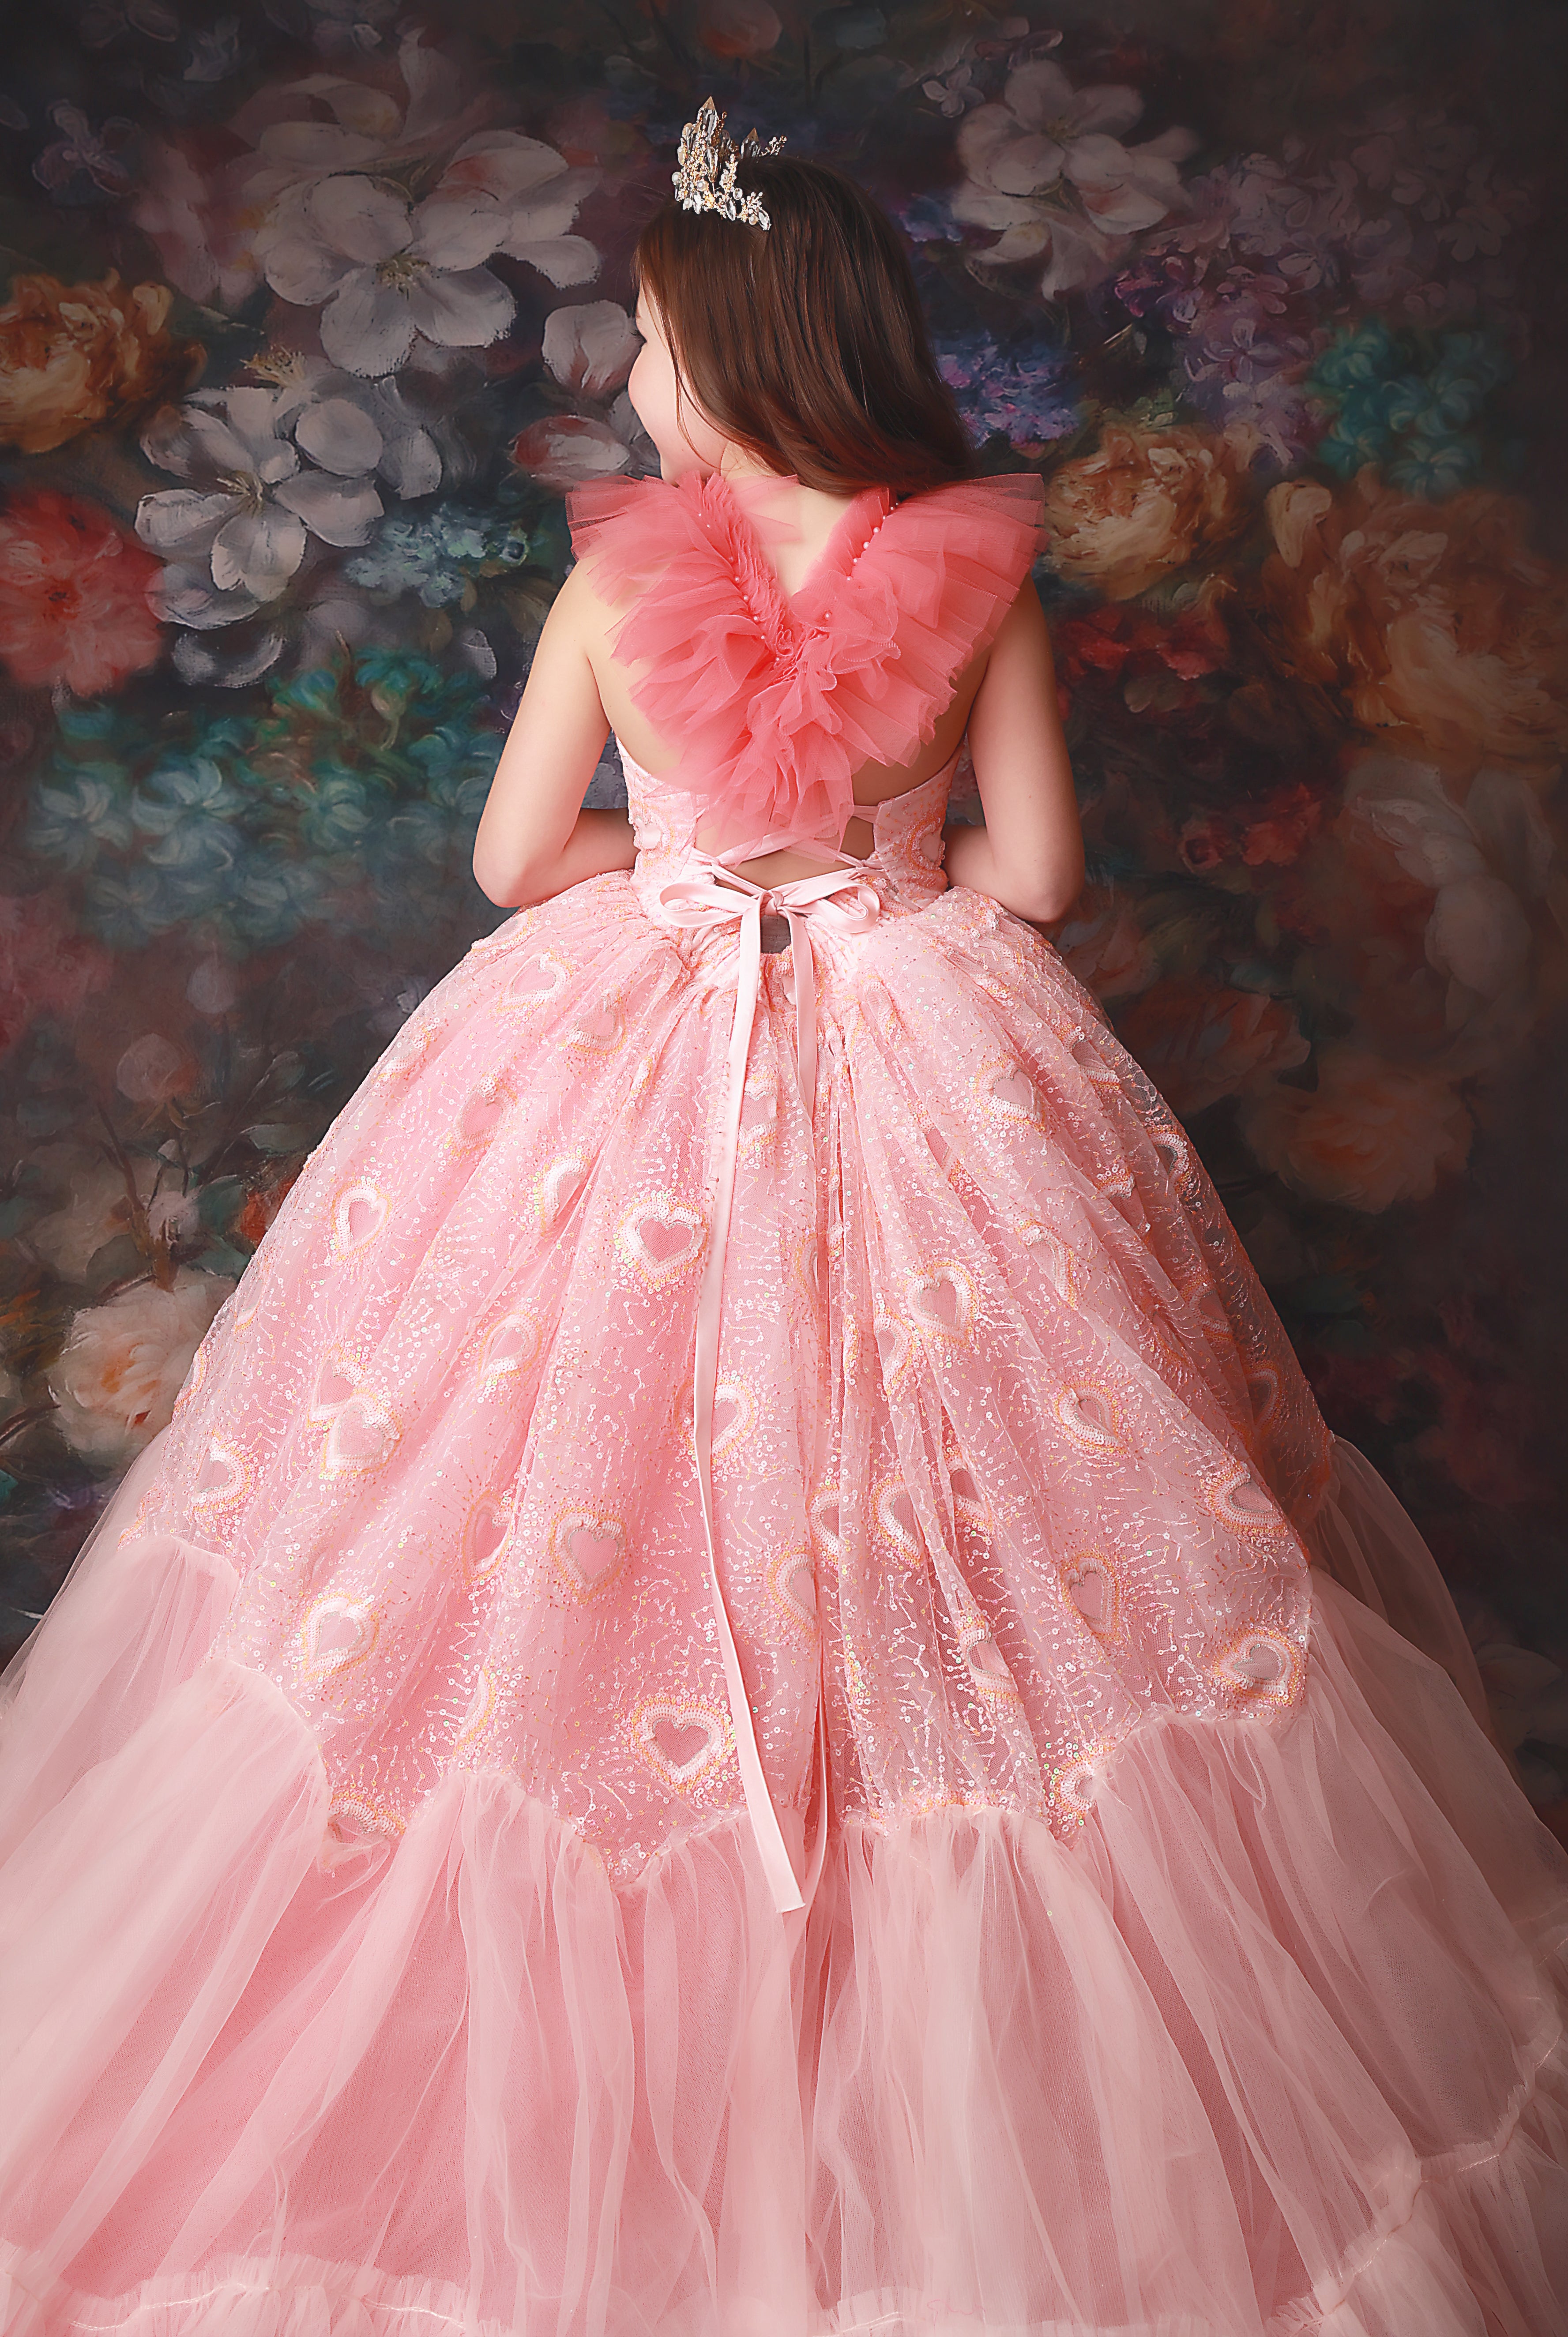 From dreamy silhouettes to intricate details, our couture gowns redefine childhood glamour.